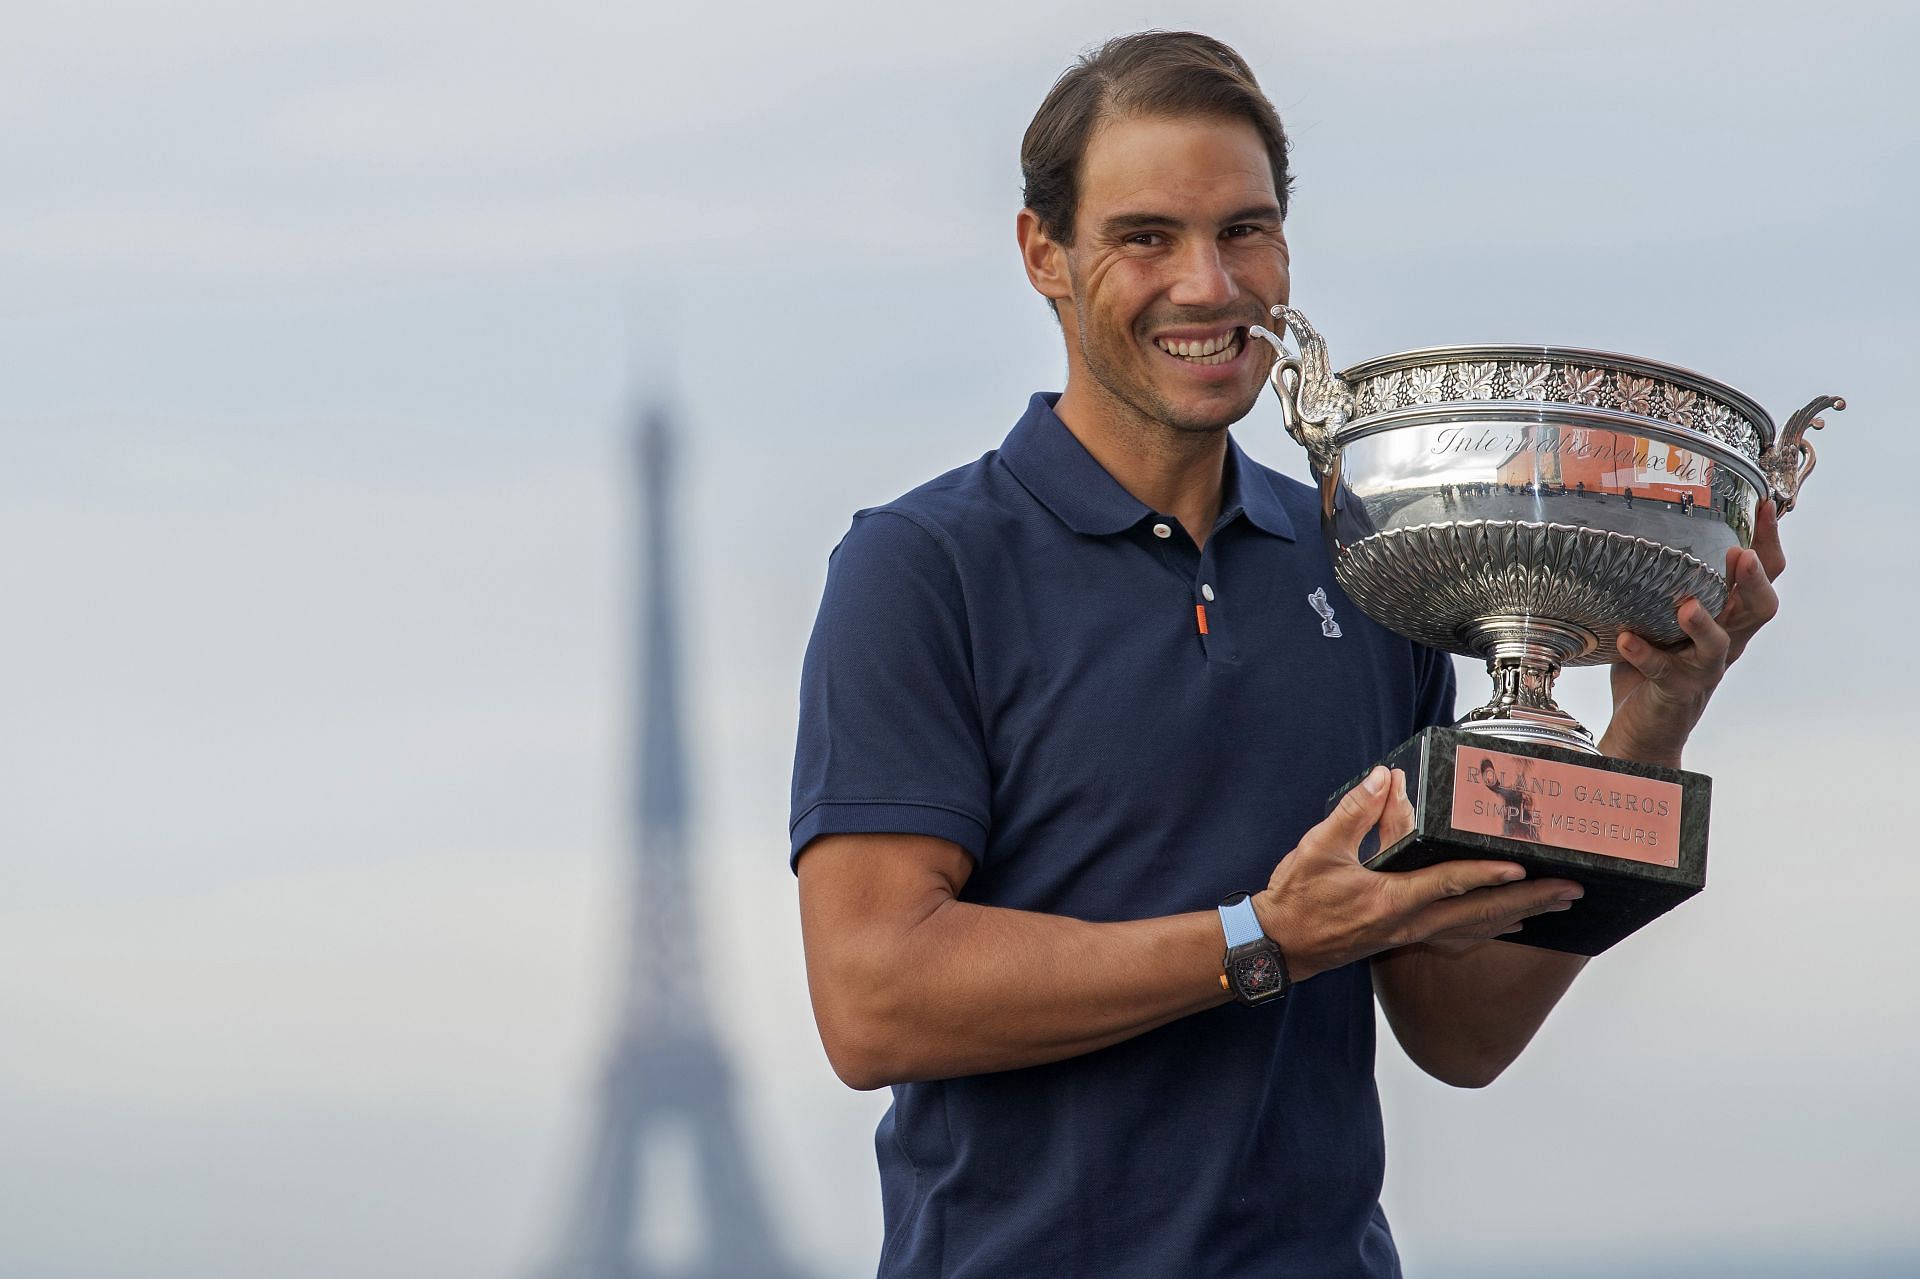 Rafael Nadal won his 13th French Open crown in 2020